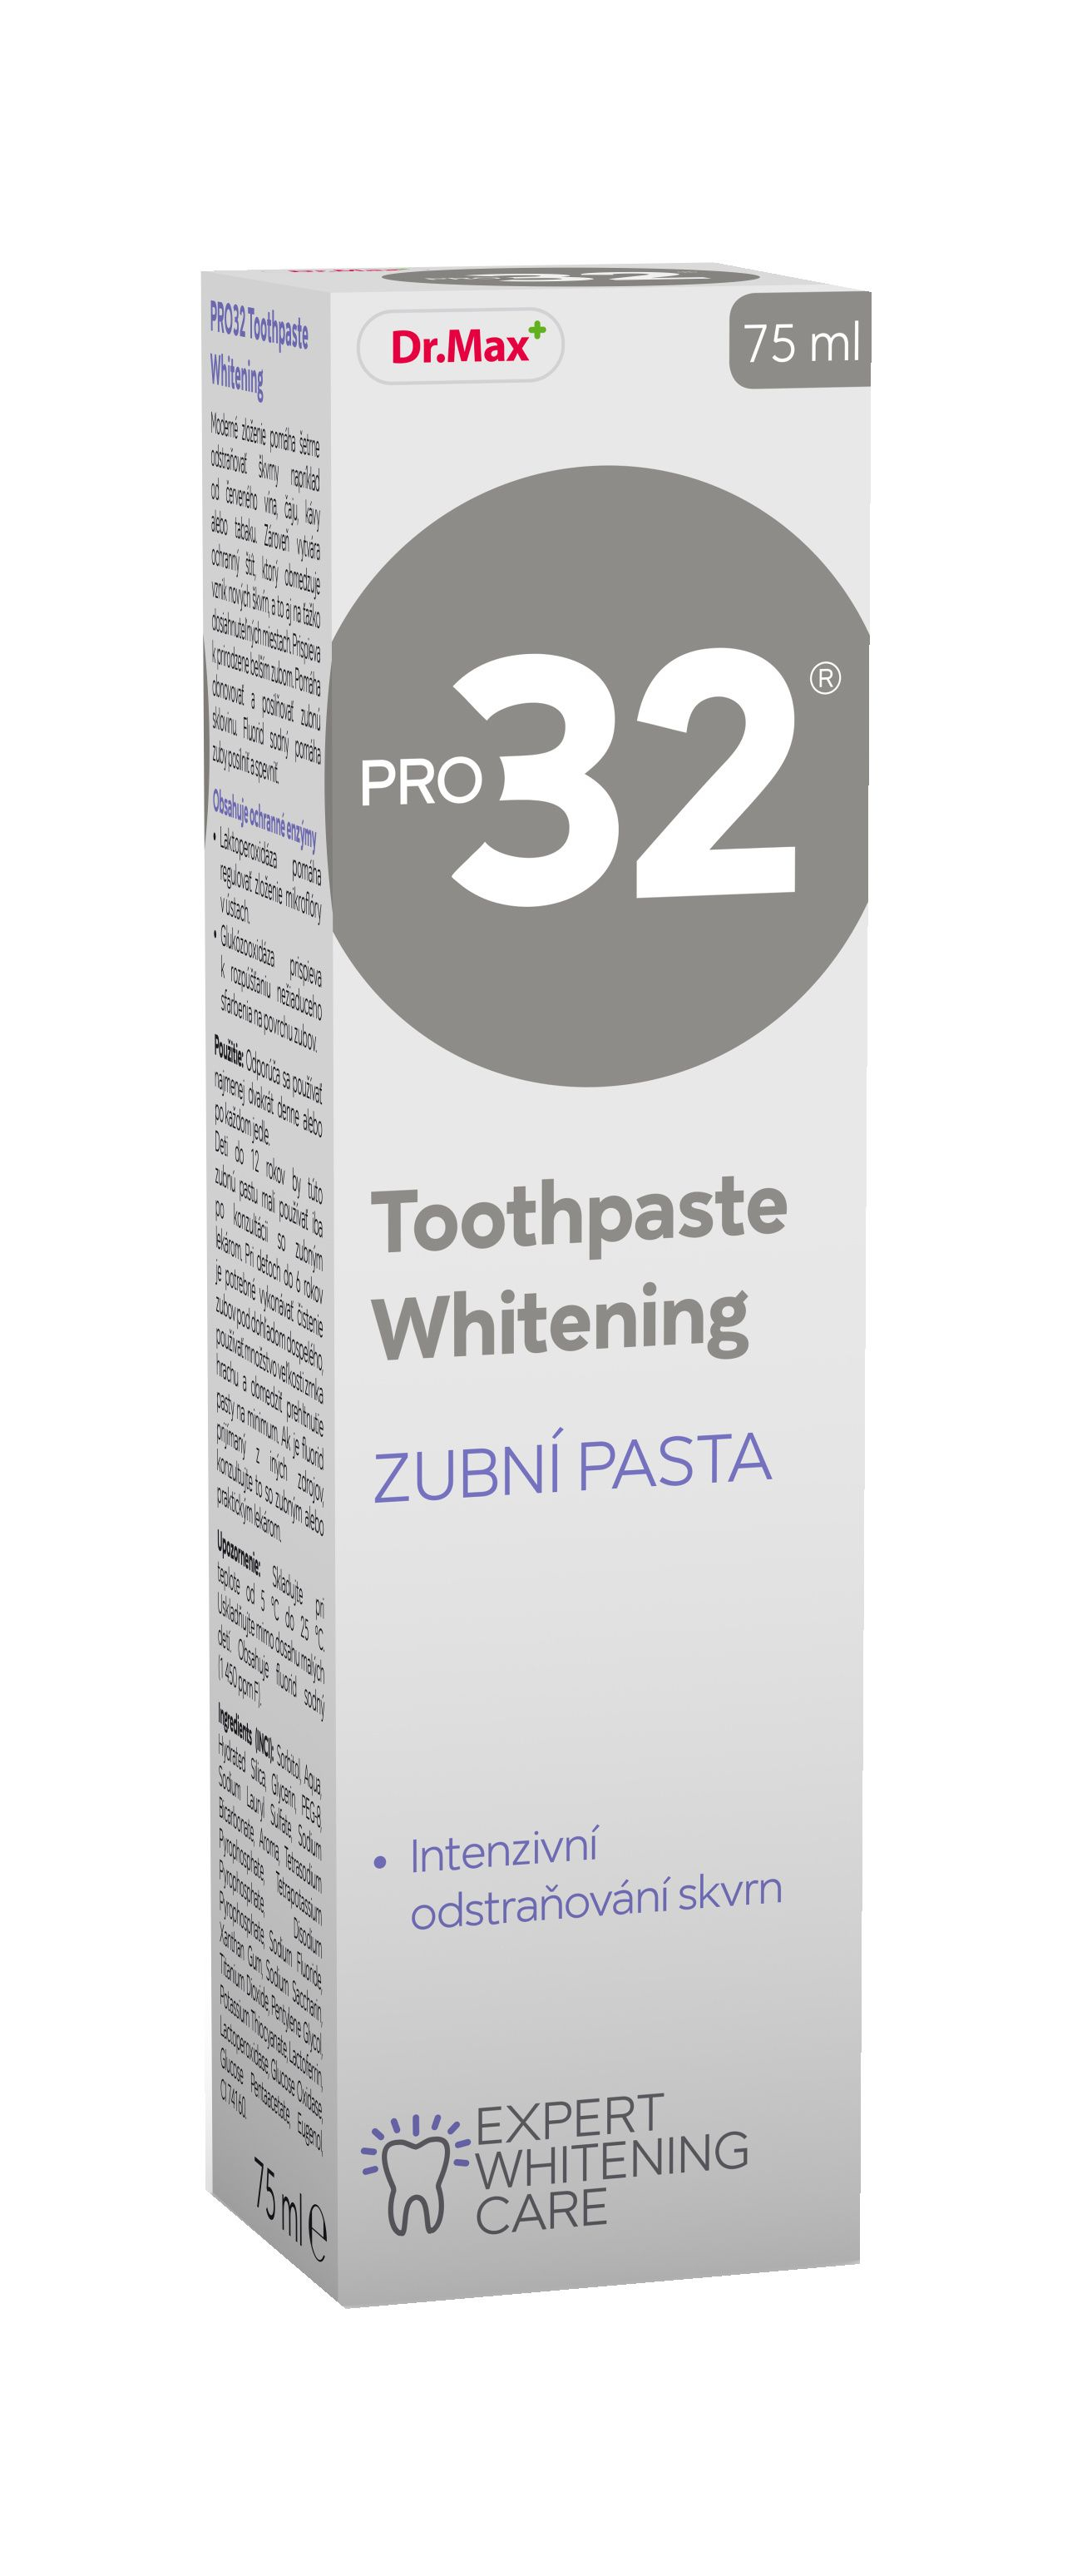 Dr.Max PRO32 Whitening zubní pasta 75 ml Dr.Max